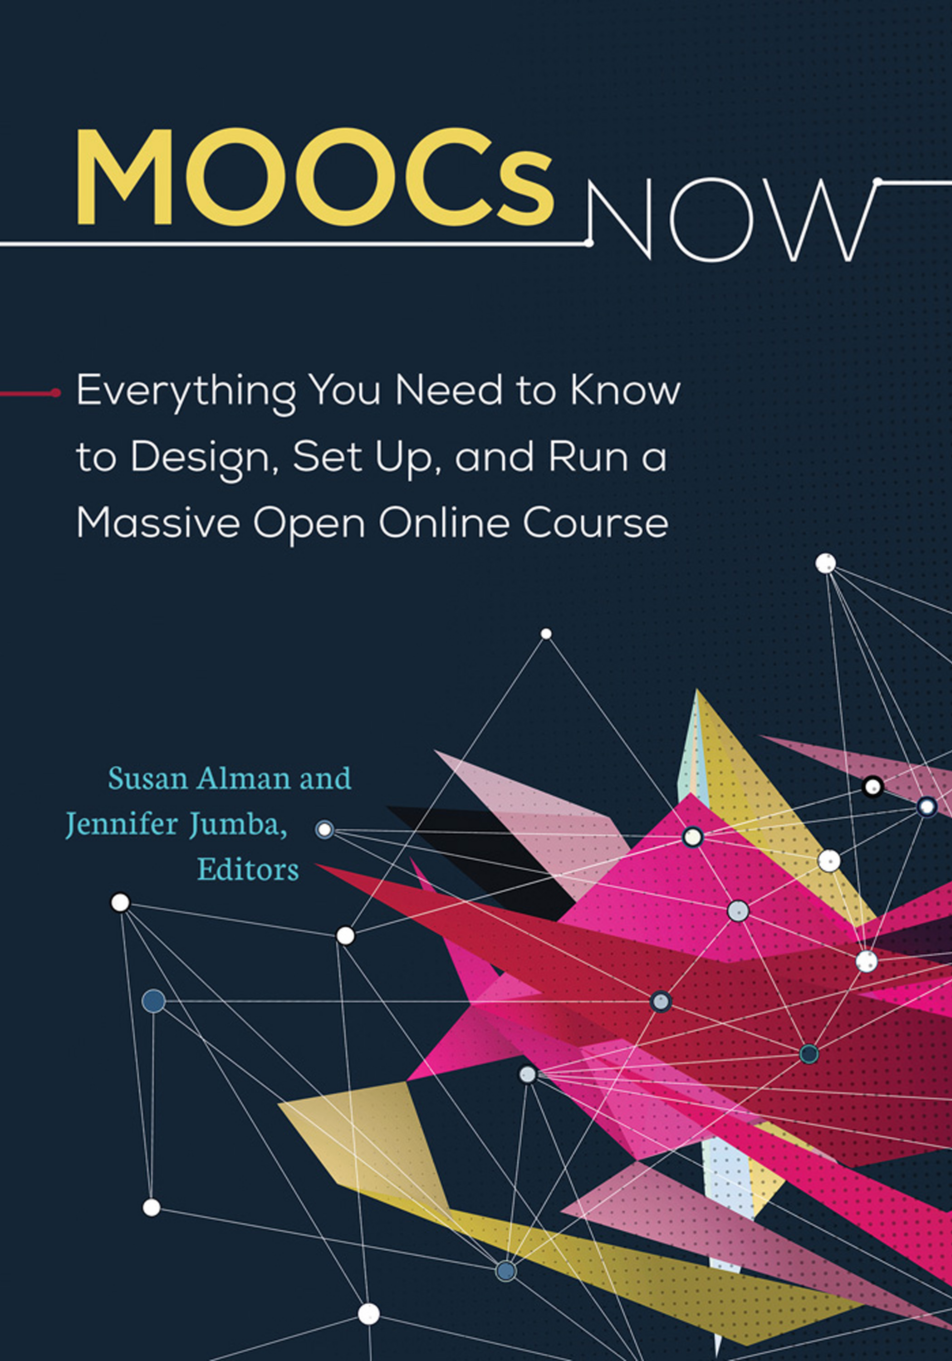 MOOCs Now: Everything You Need to Know to Design, Set Up, and Run a Massive Open Online Course page Cover1